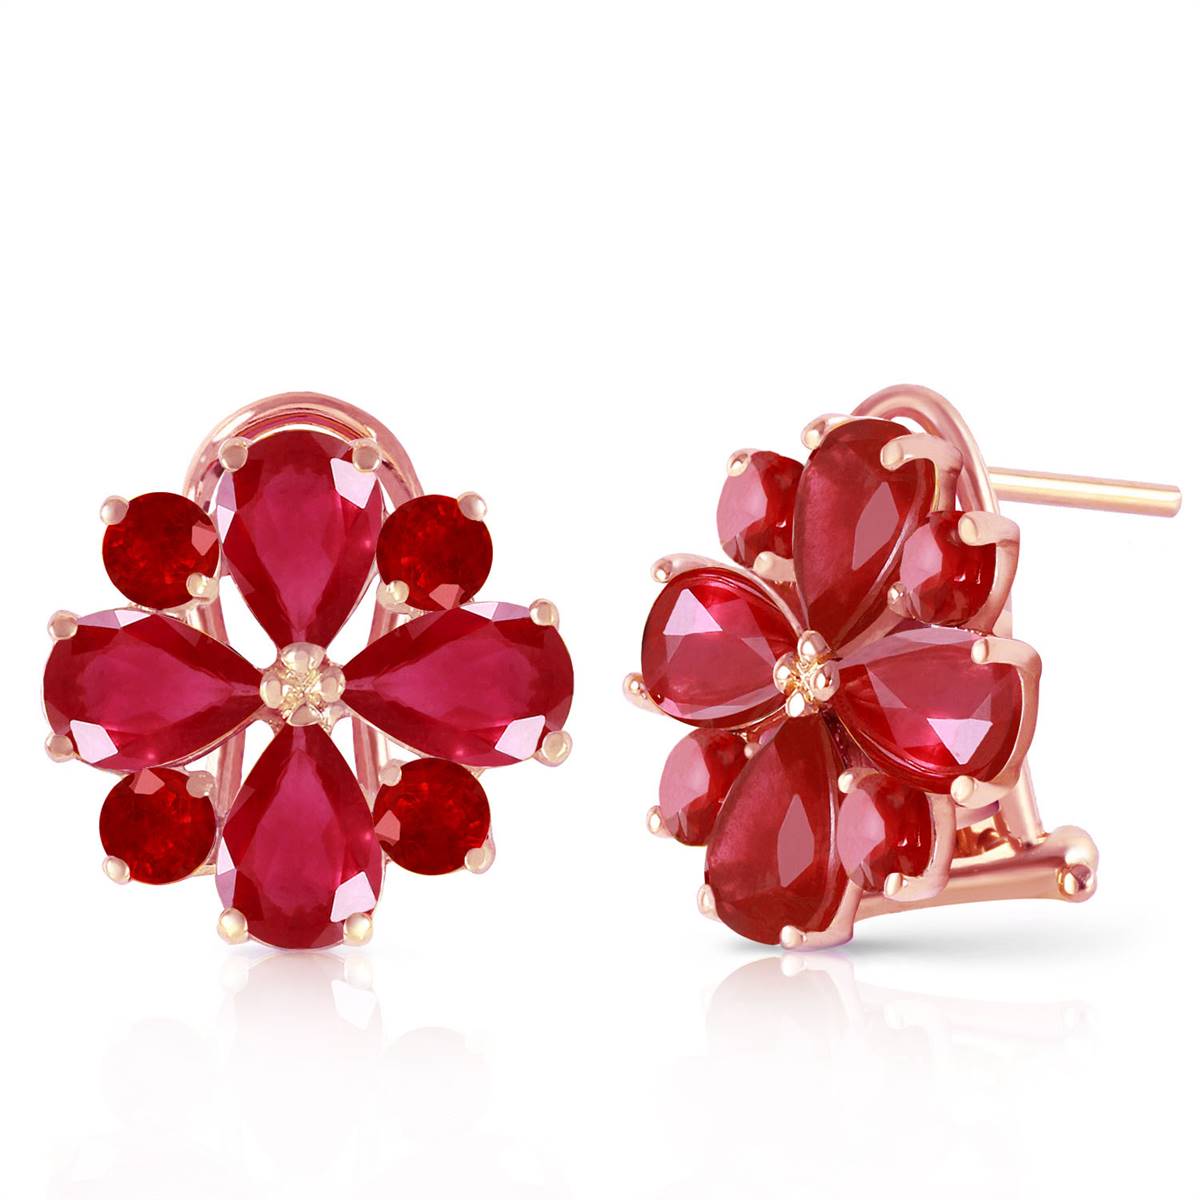 4.85 Carat 14K Solid Rose Gold French Clips Earrings Natural Ruby